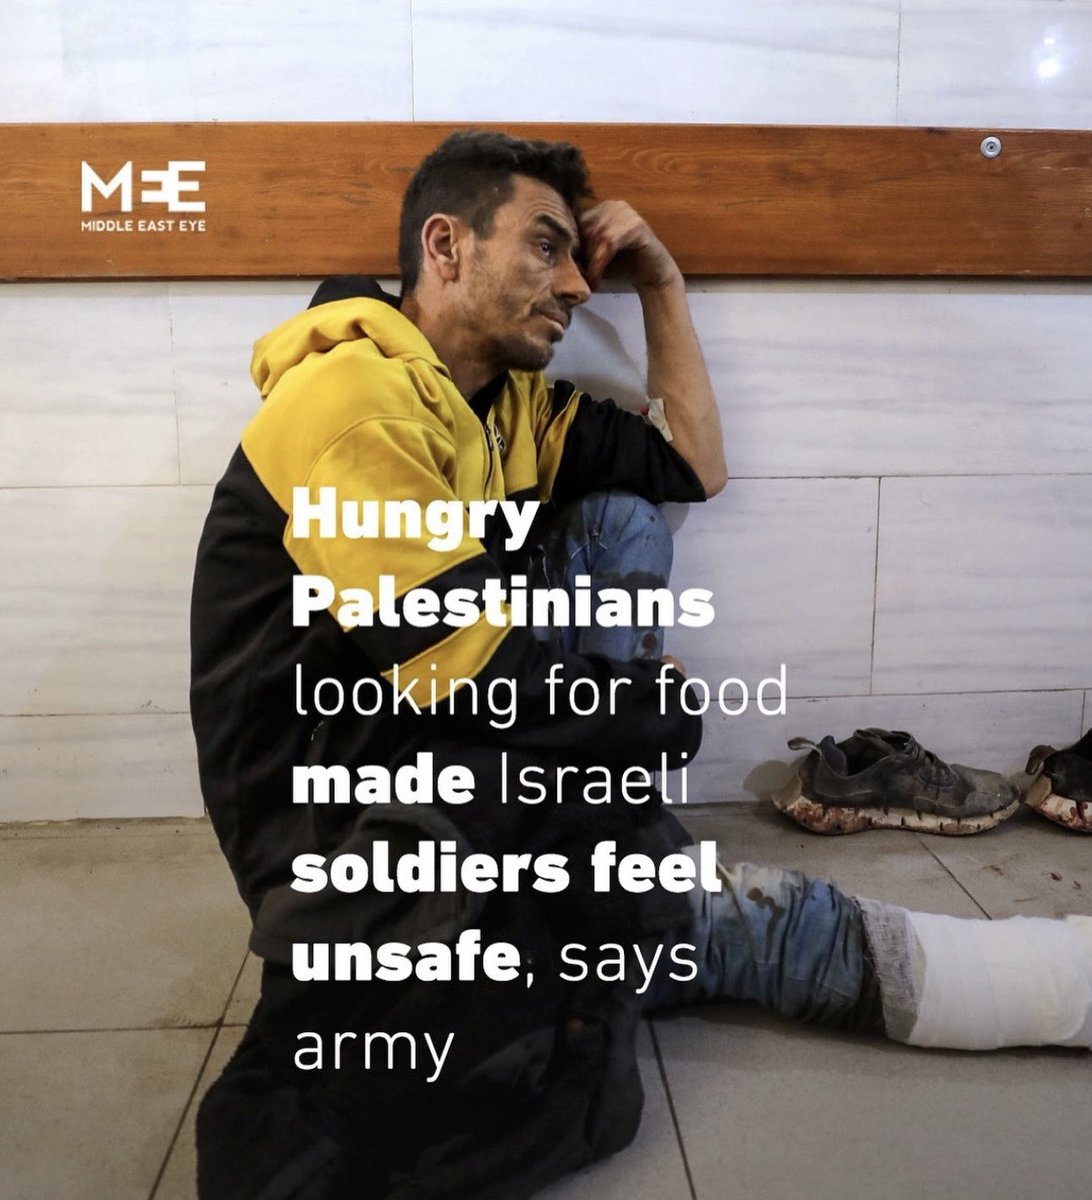 I'm speechless. No more words. They starved them, then shot at them seeking aid. And their excuse? Hungry Palestinians made Israeli soldiers feel unsafe? Unbelievable.